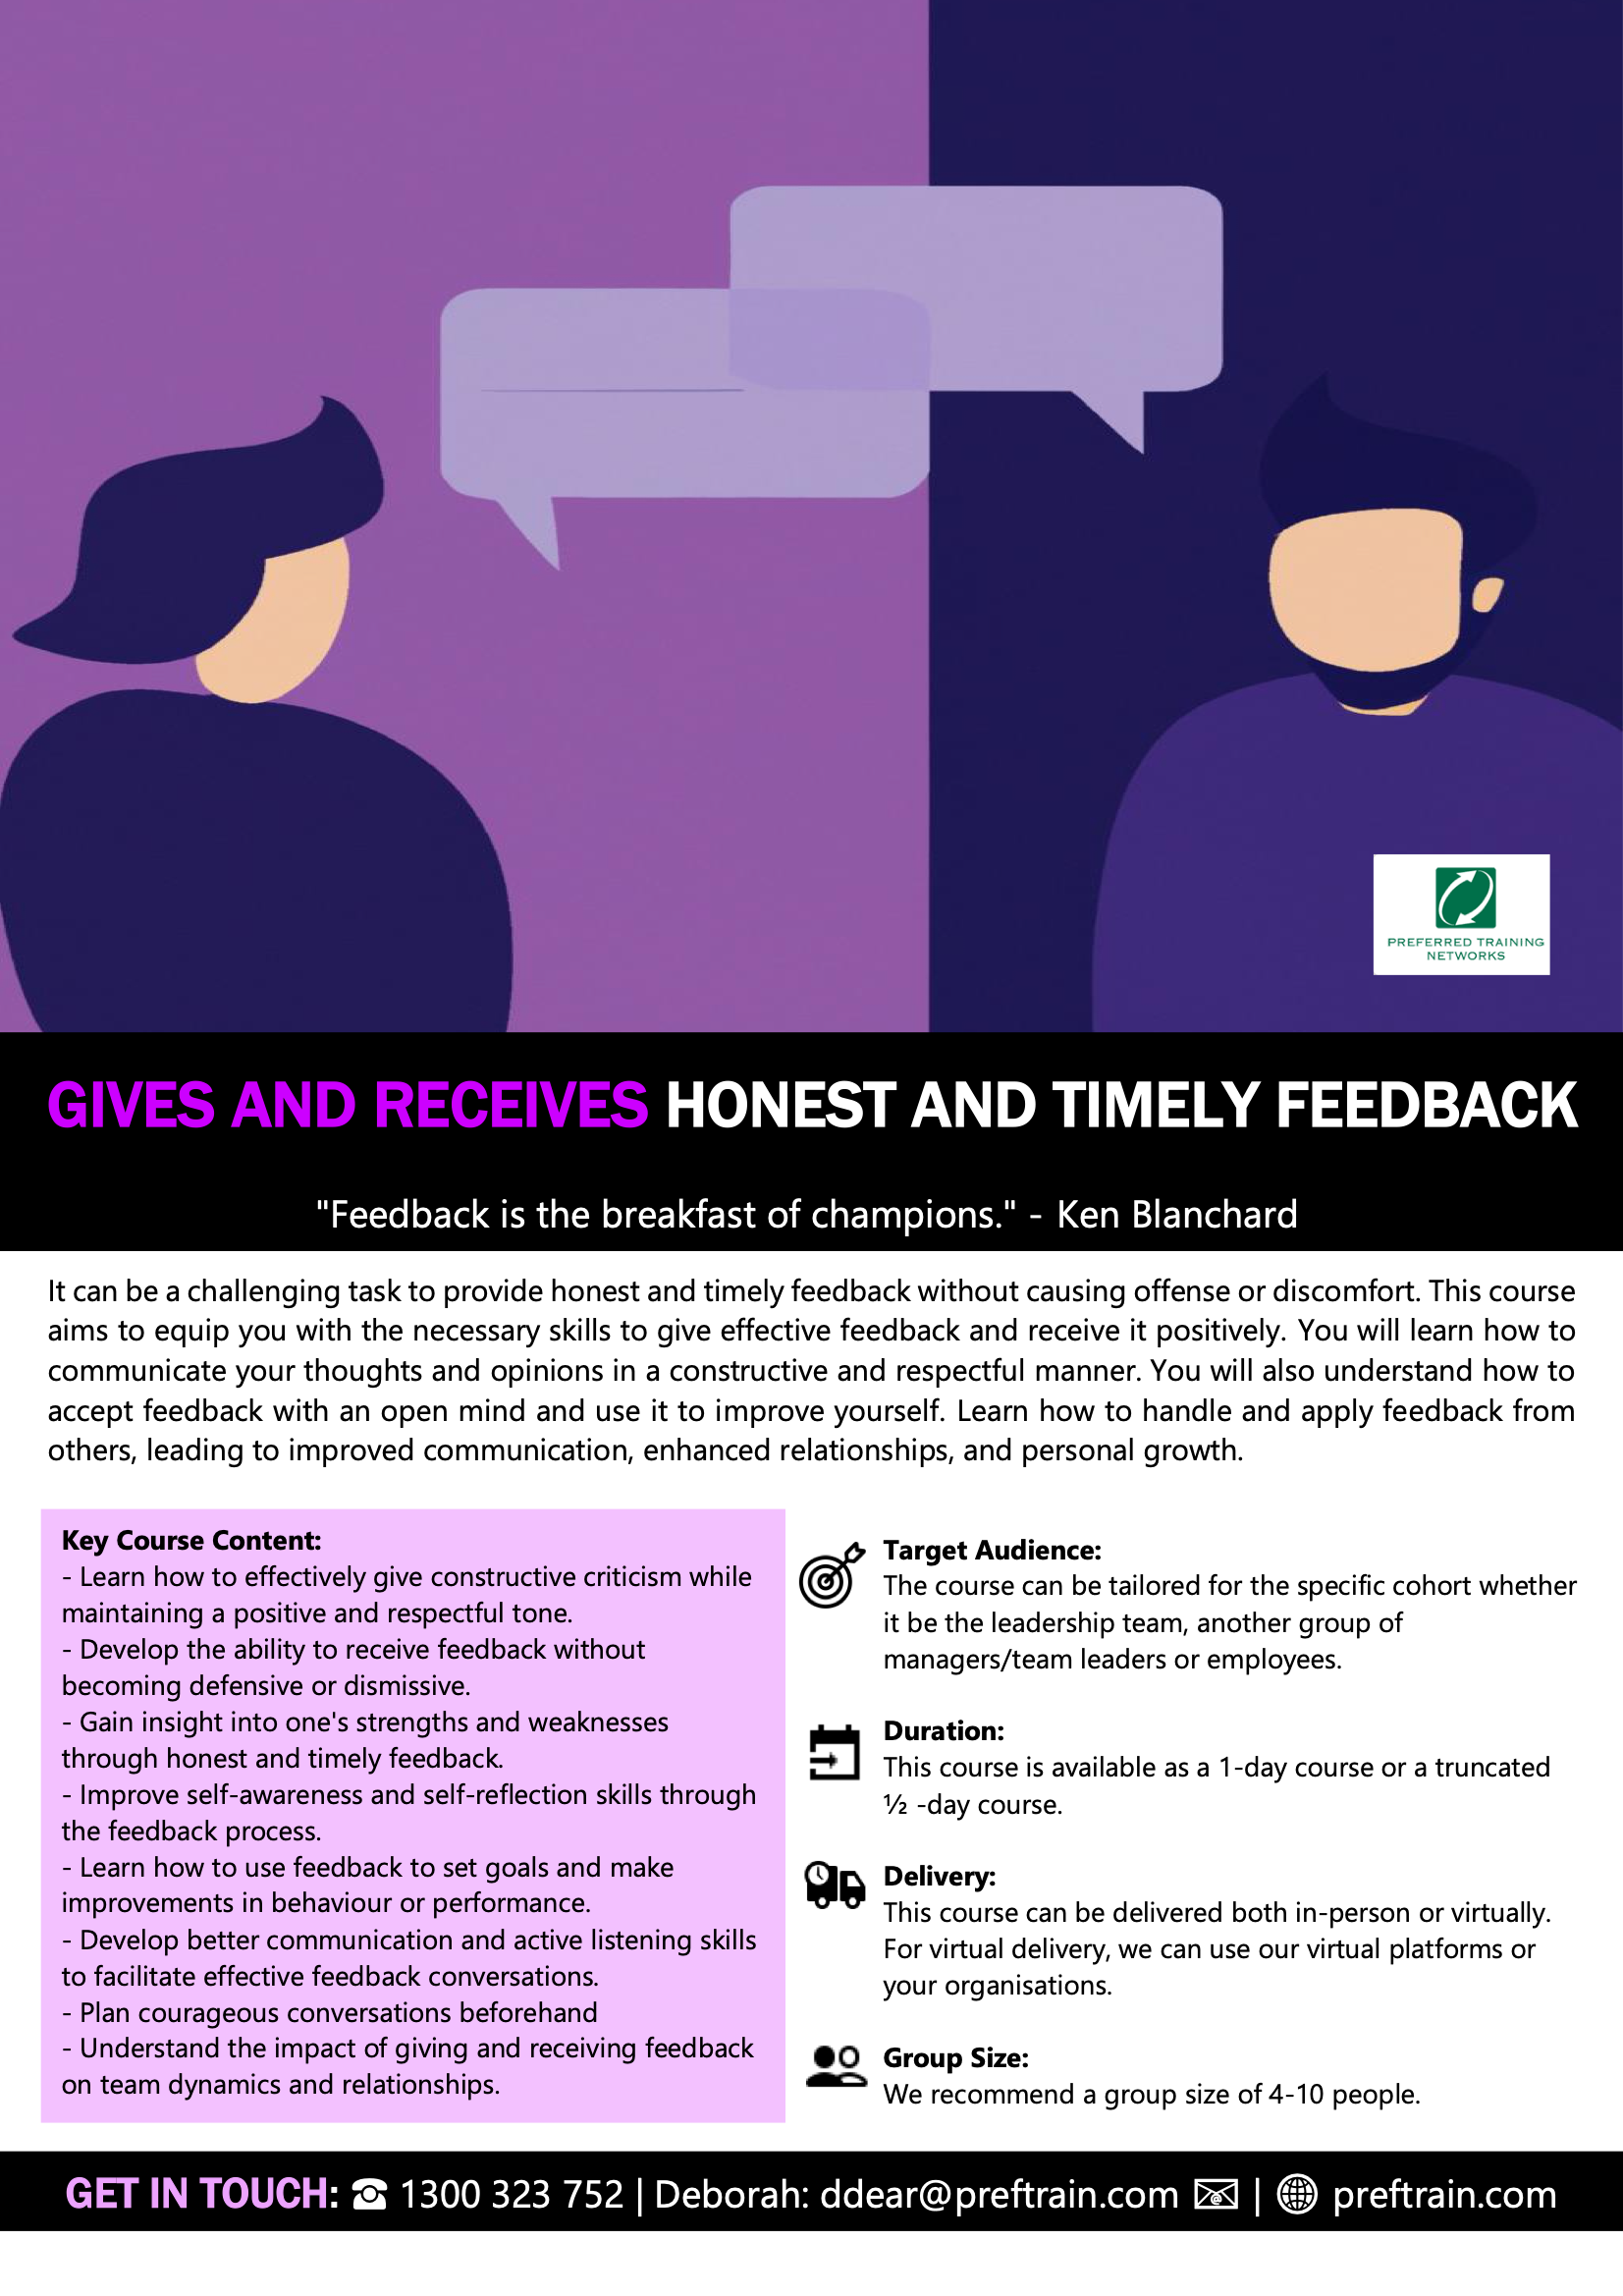 Gives and Receives Honest and Timely Feedback